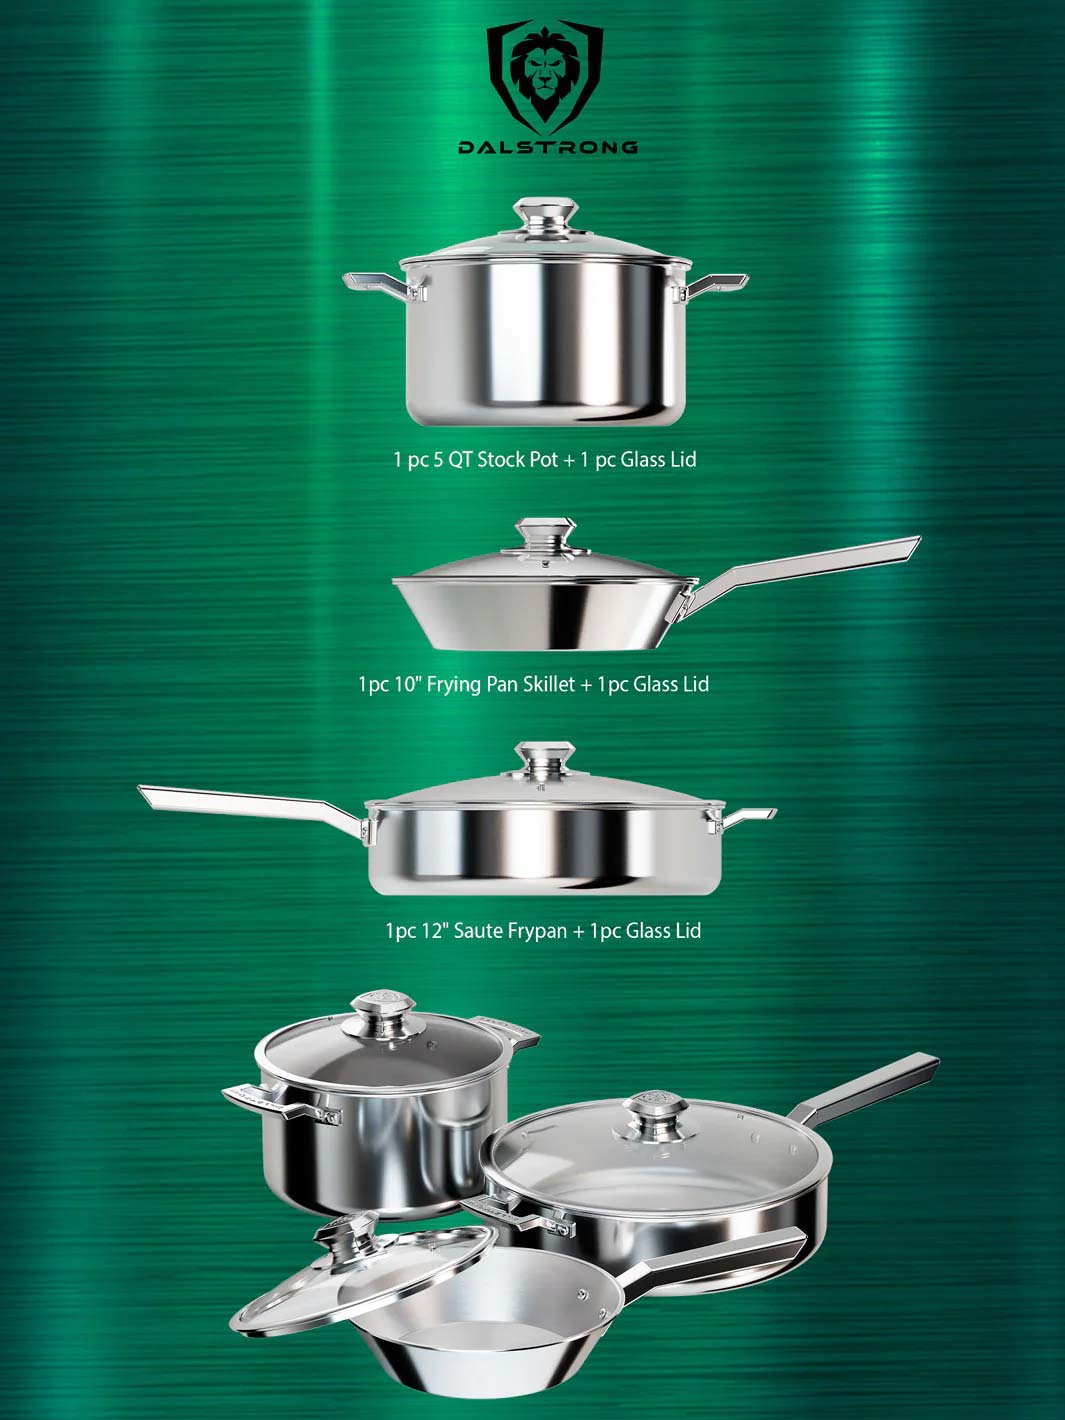 Dalstrong oberon series 6 piece cookware set featuring it's complete set of cookwares.